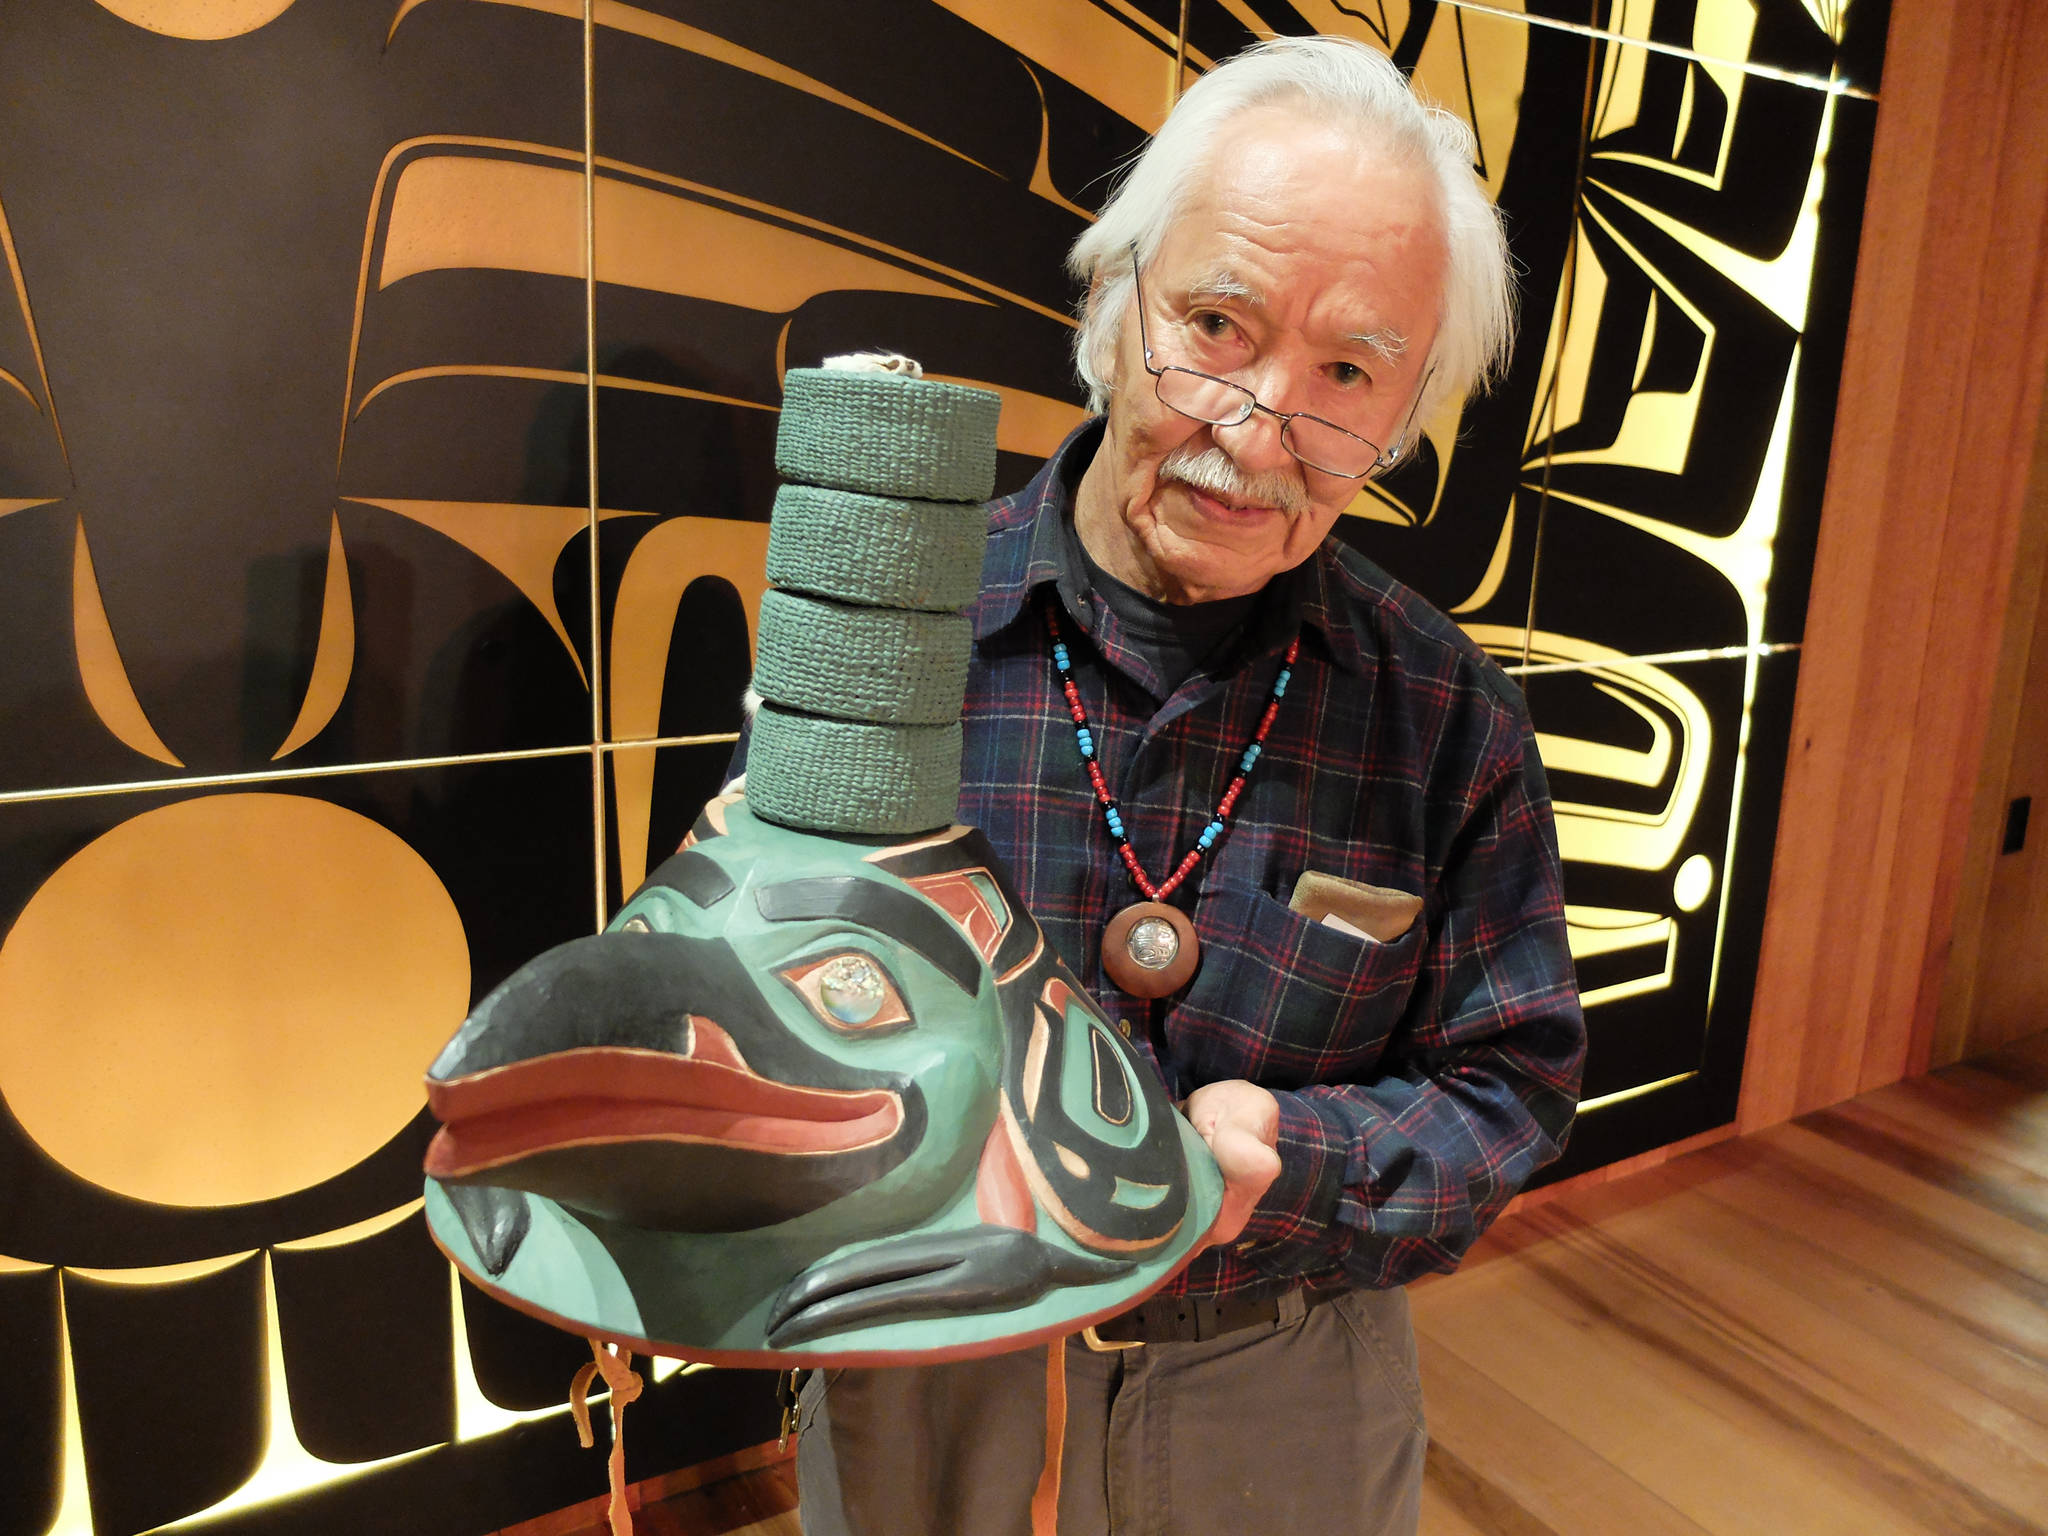 Check out this beautifully carved Raven hat, on public display Friday in Juneau